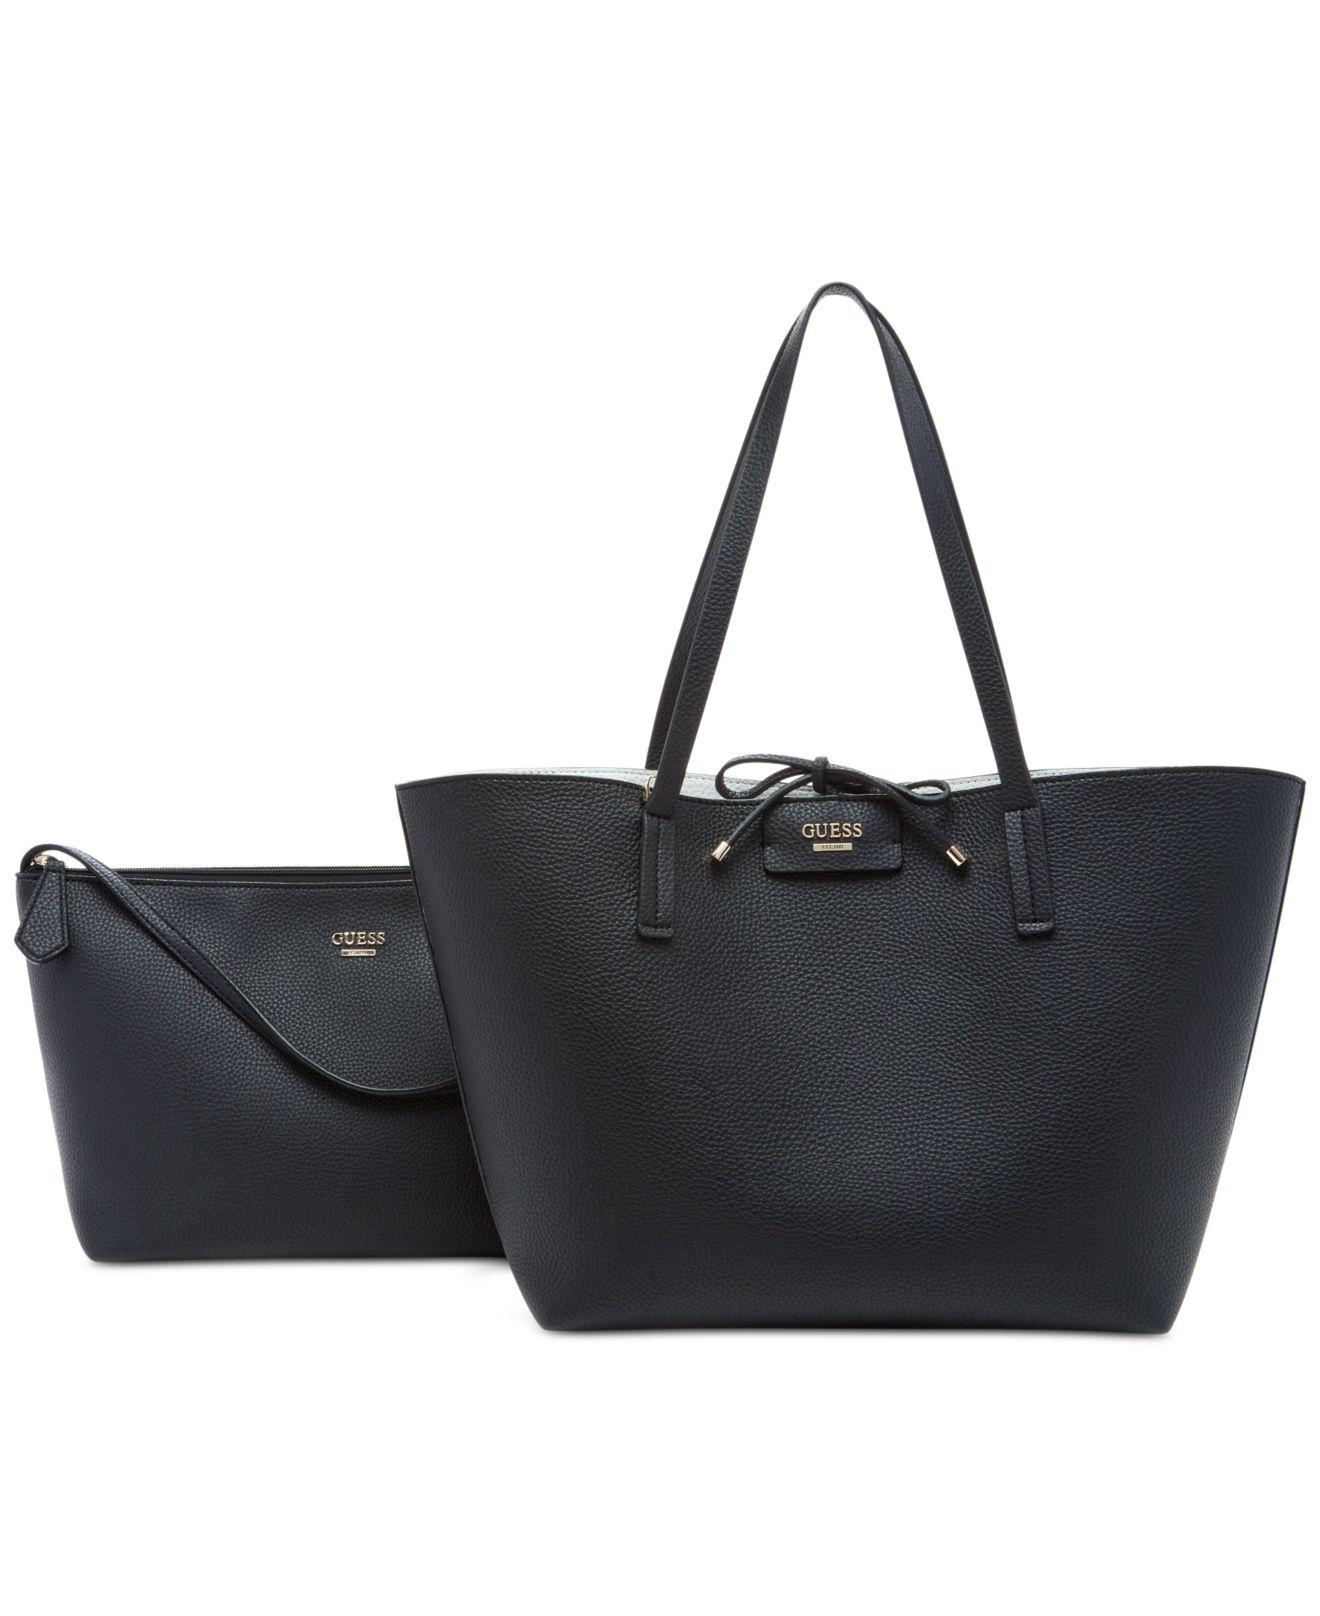 Guess Bobbi Inside Out Tote in Black - Lyst